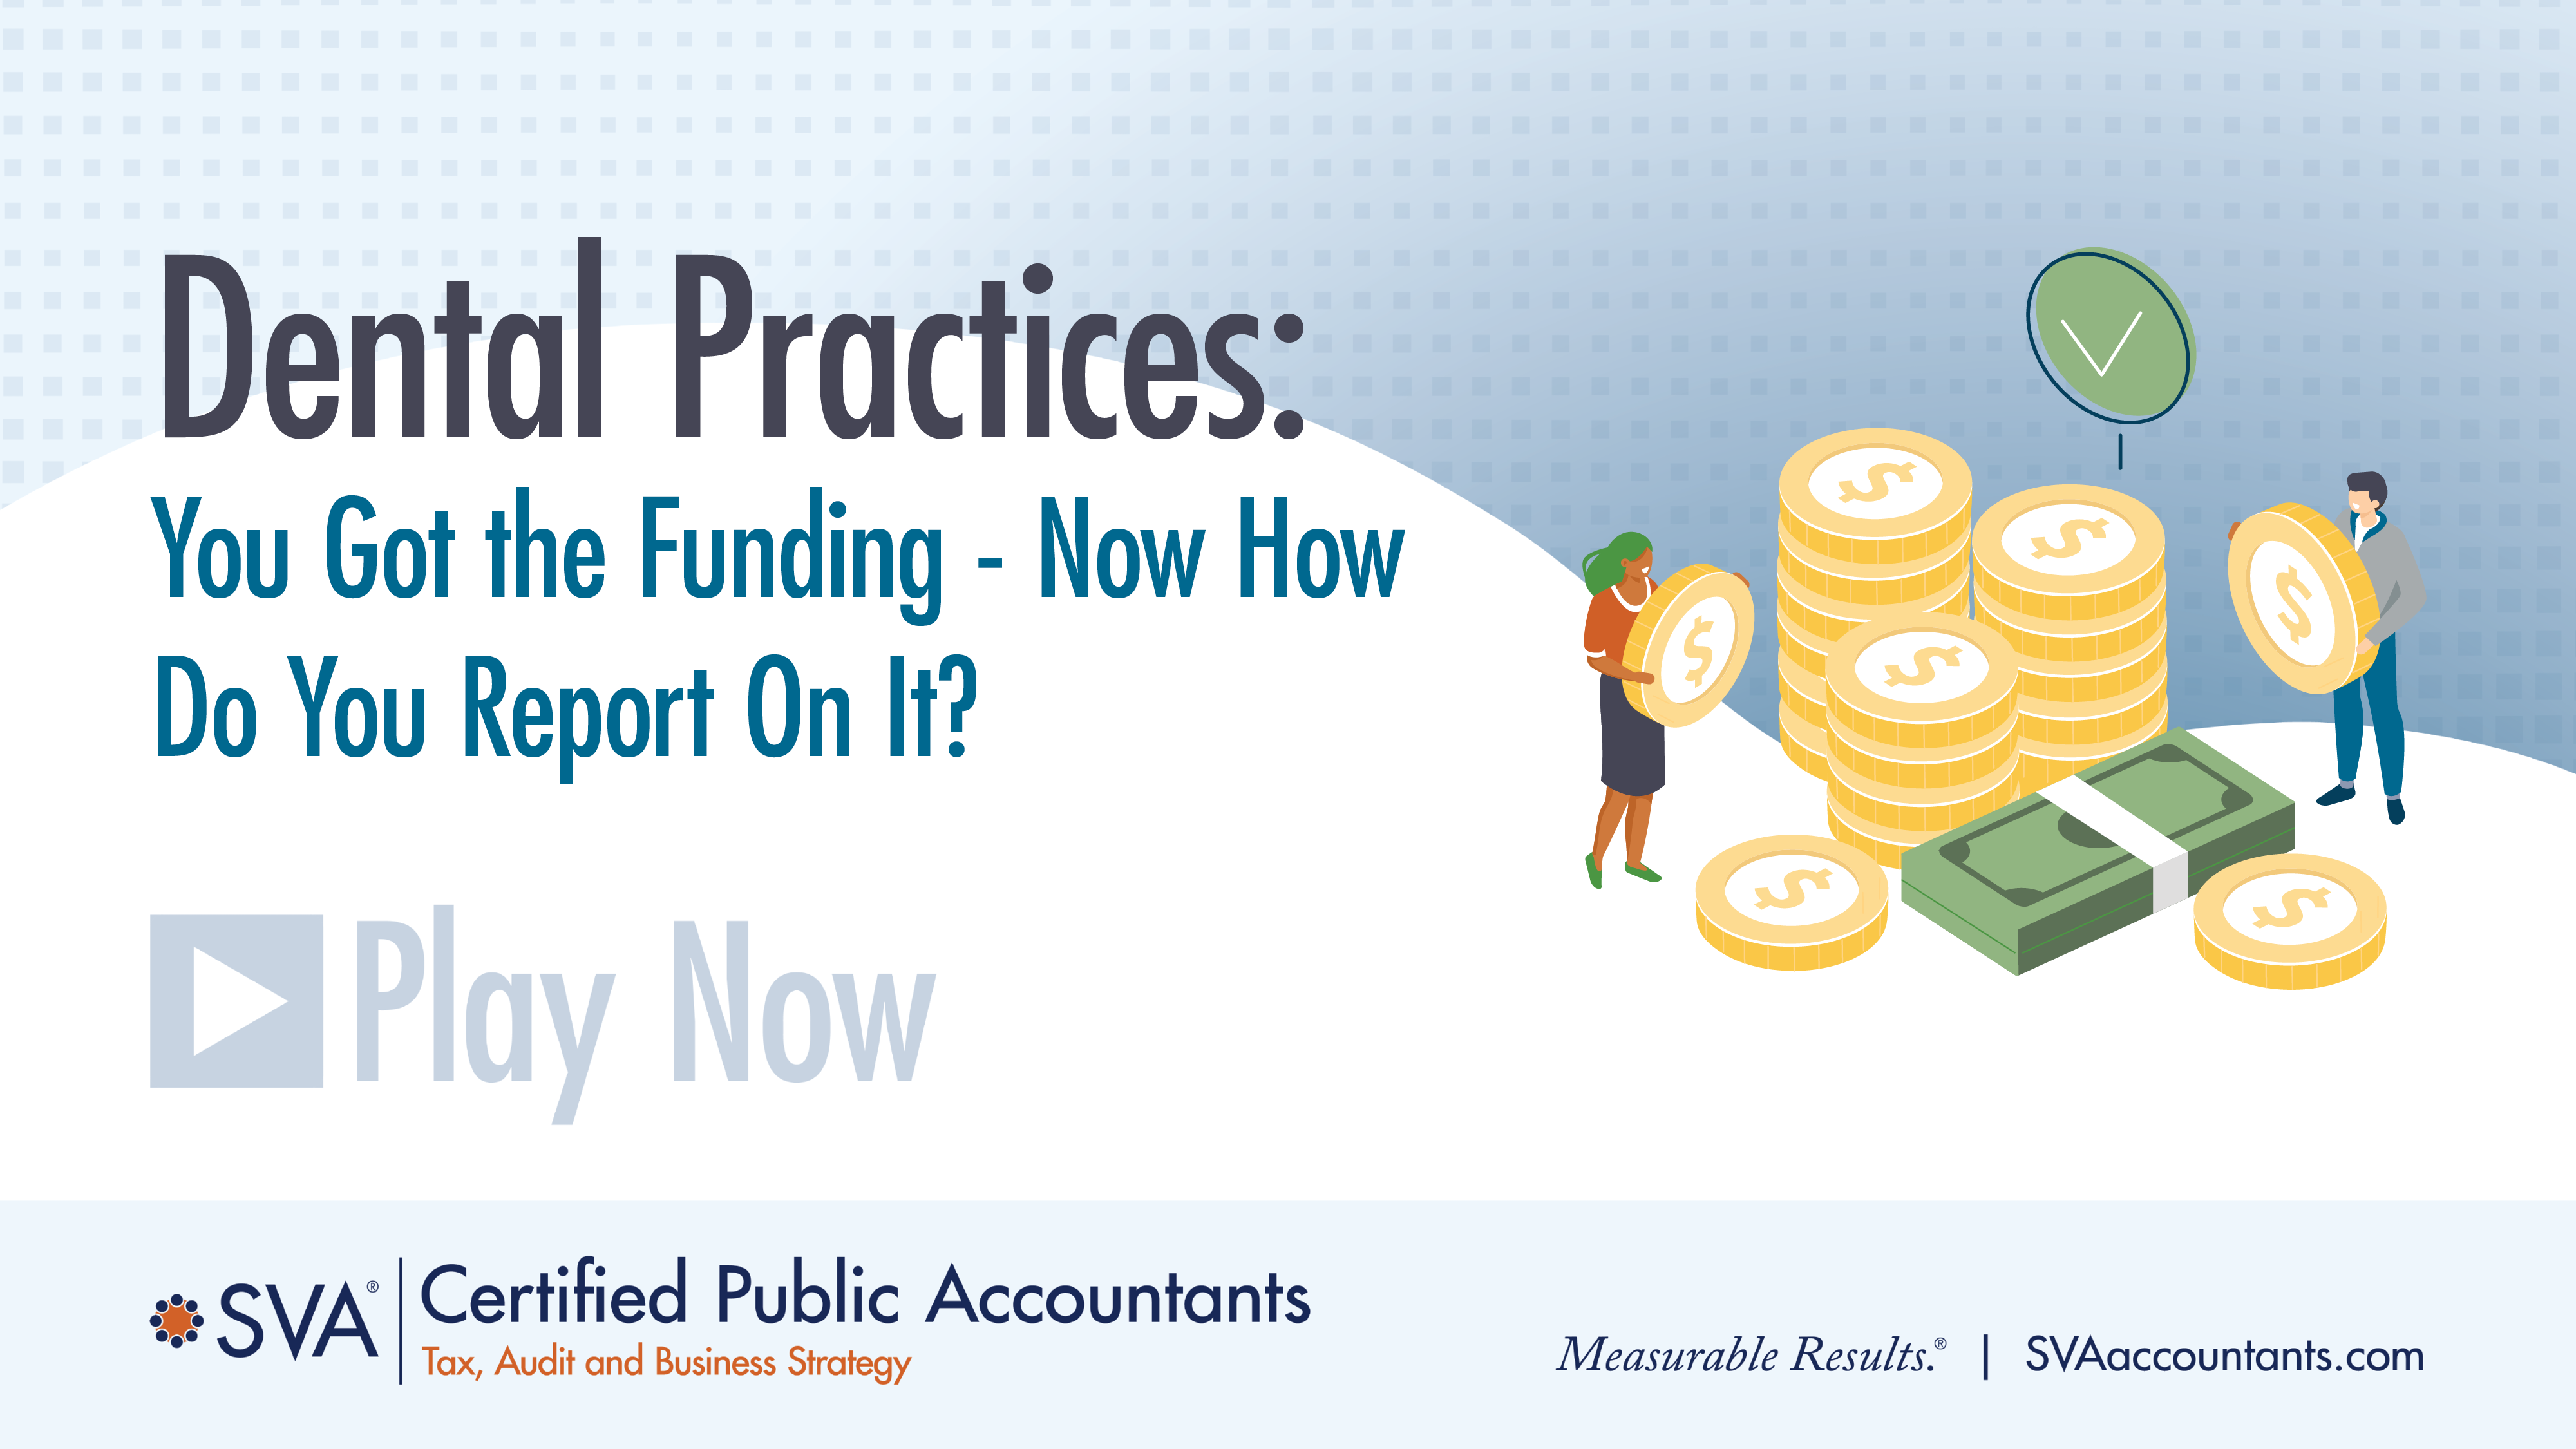 Dental Practices: You Got the Funding - Now How Do You Report On It?